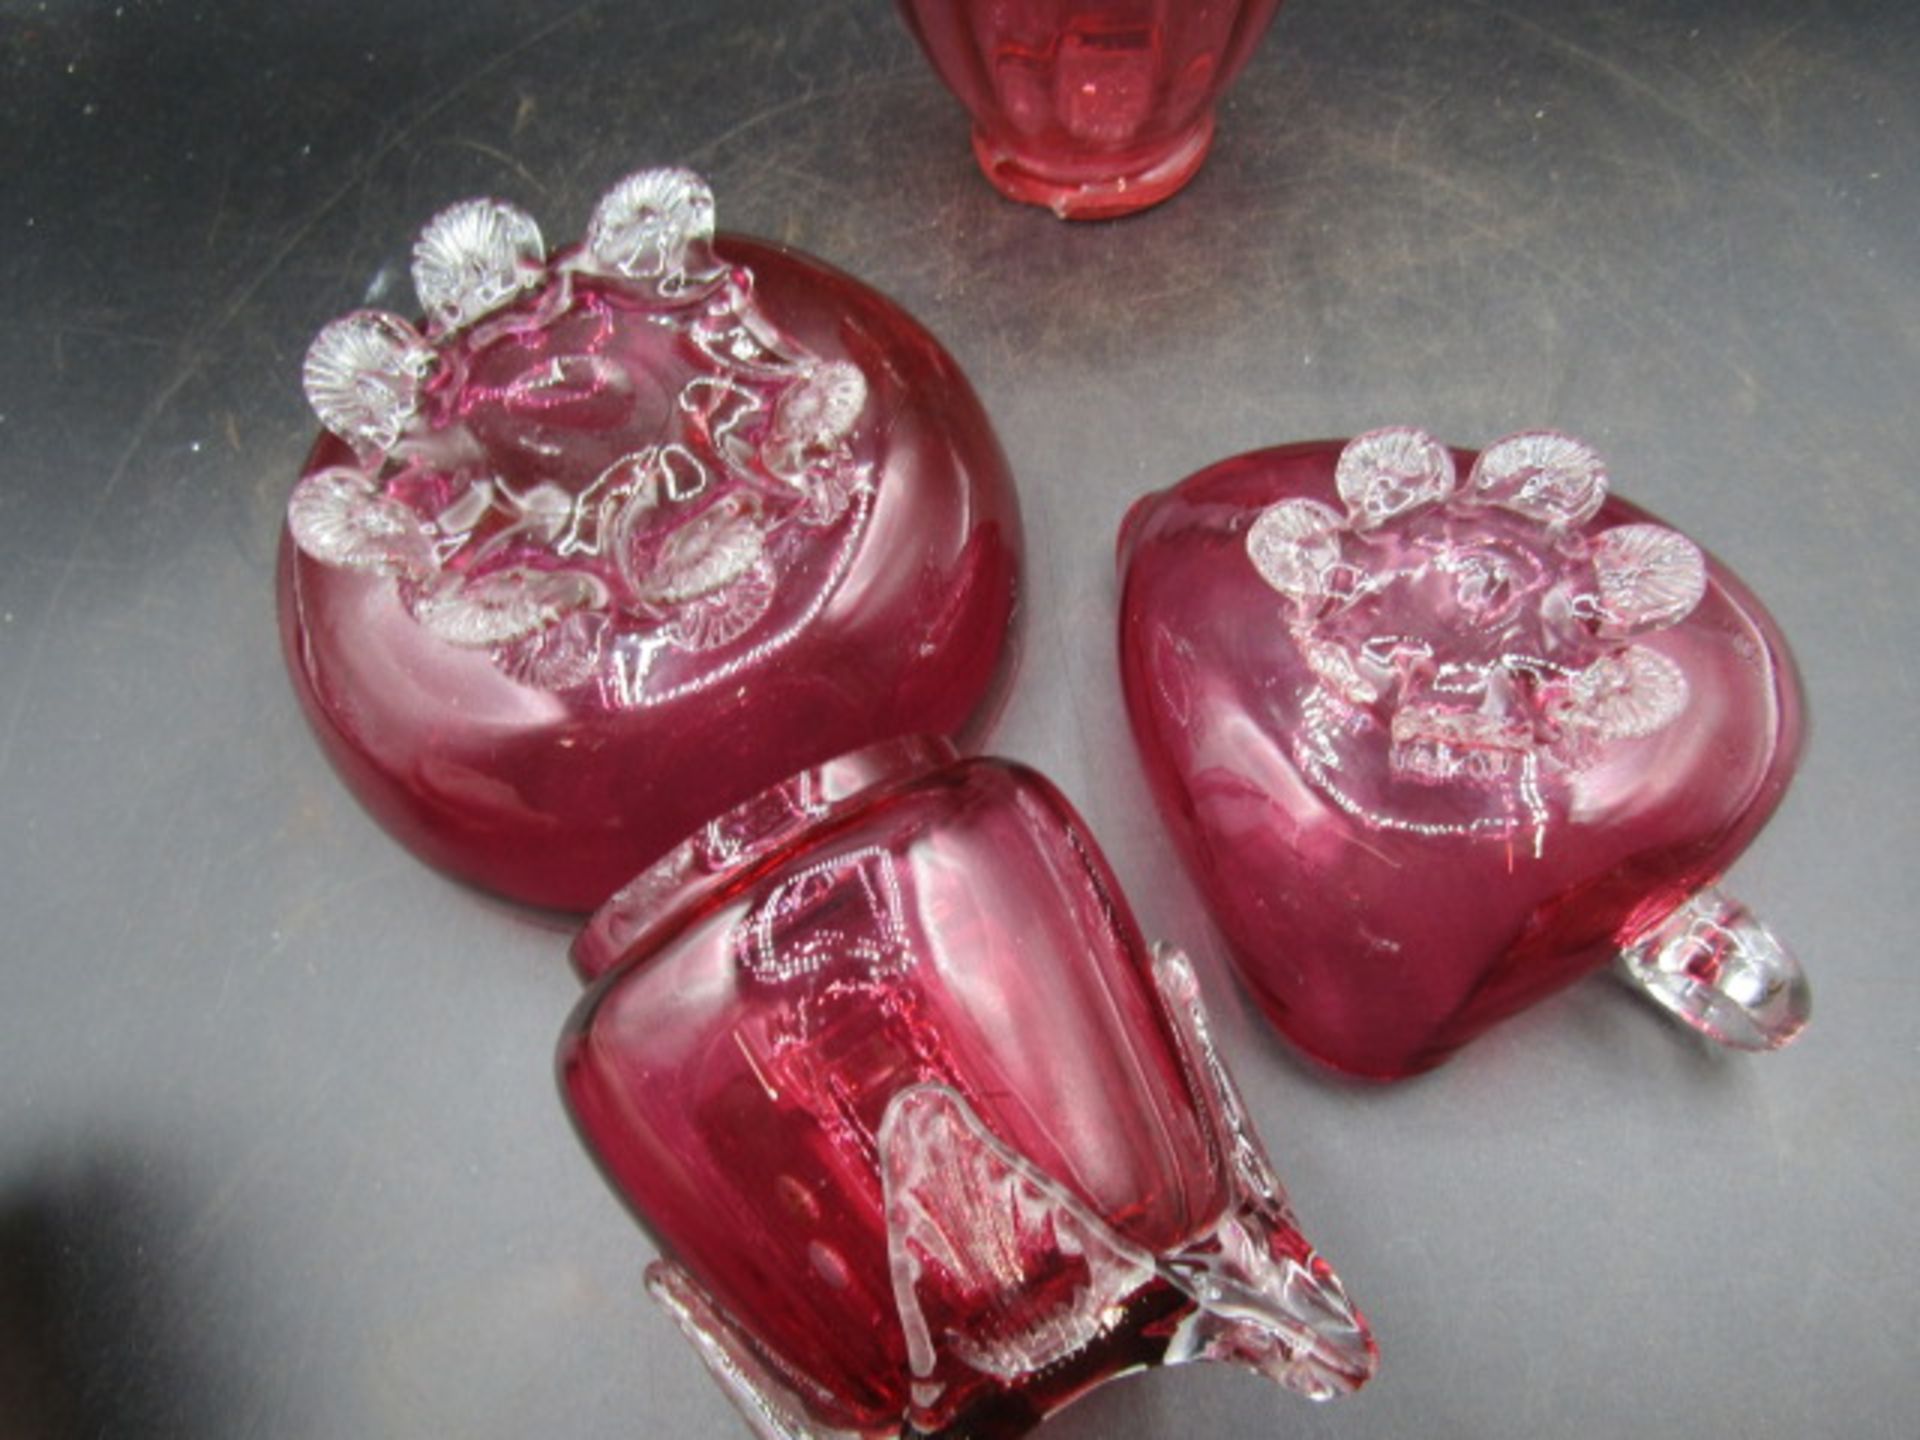 cranberry glass - Image 3 of 3